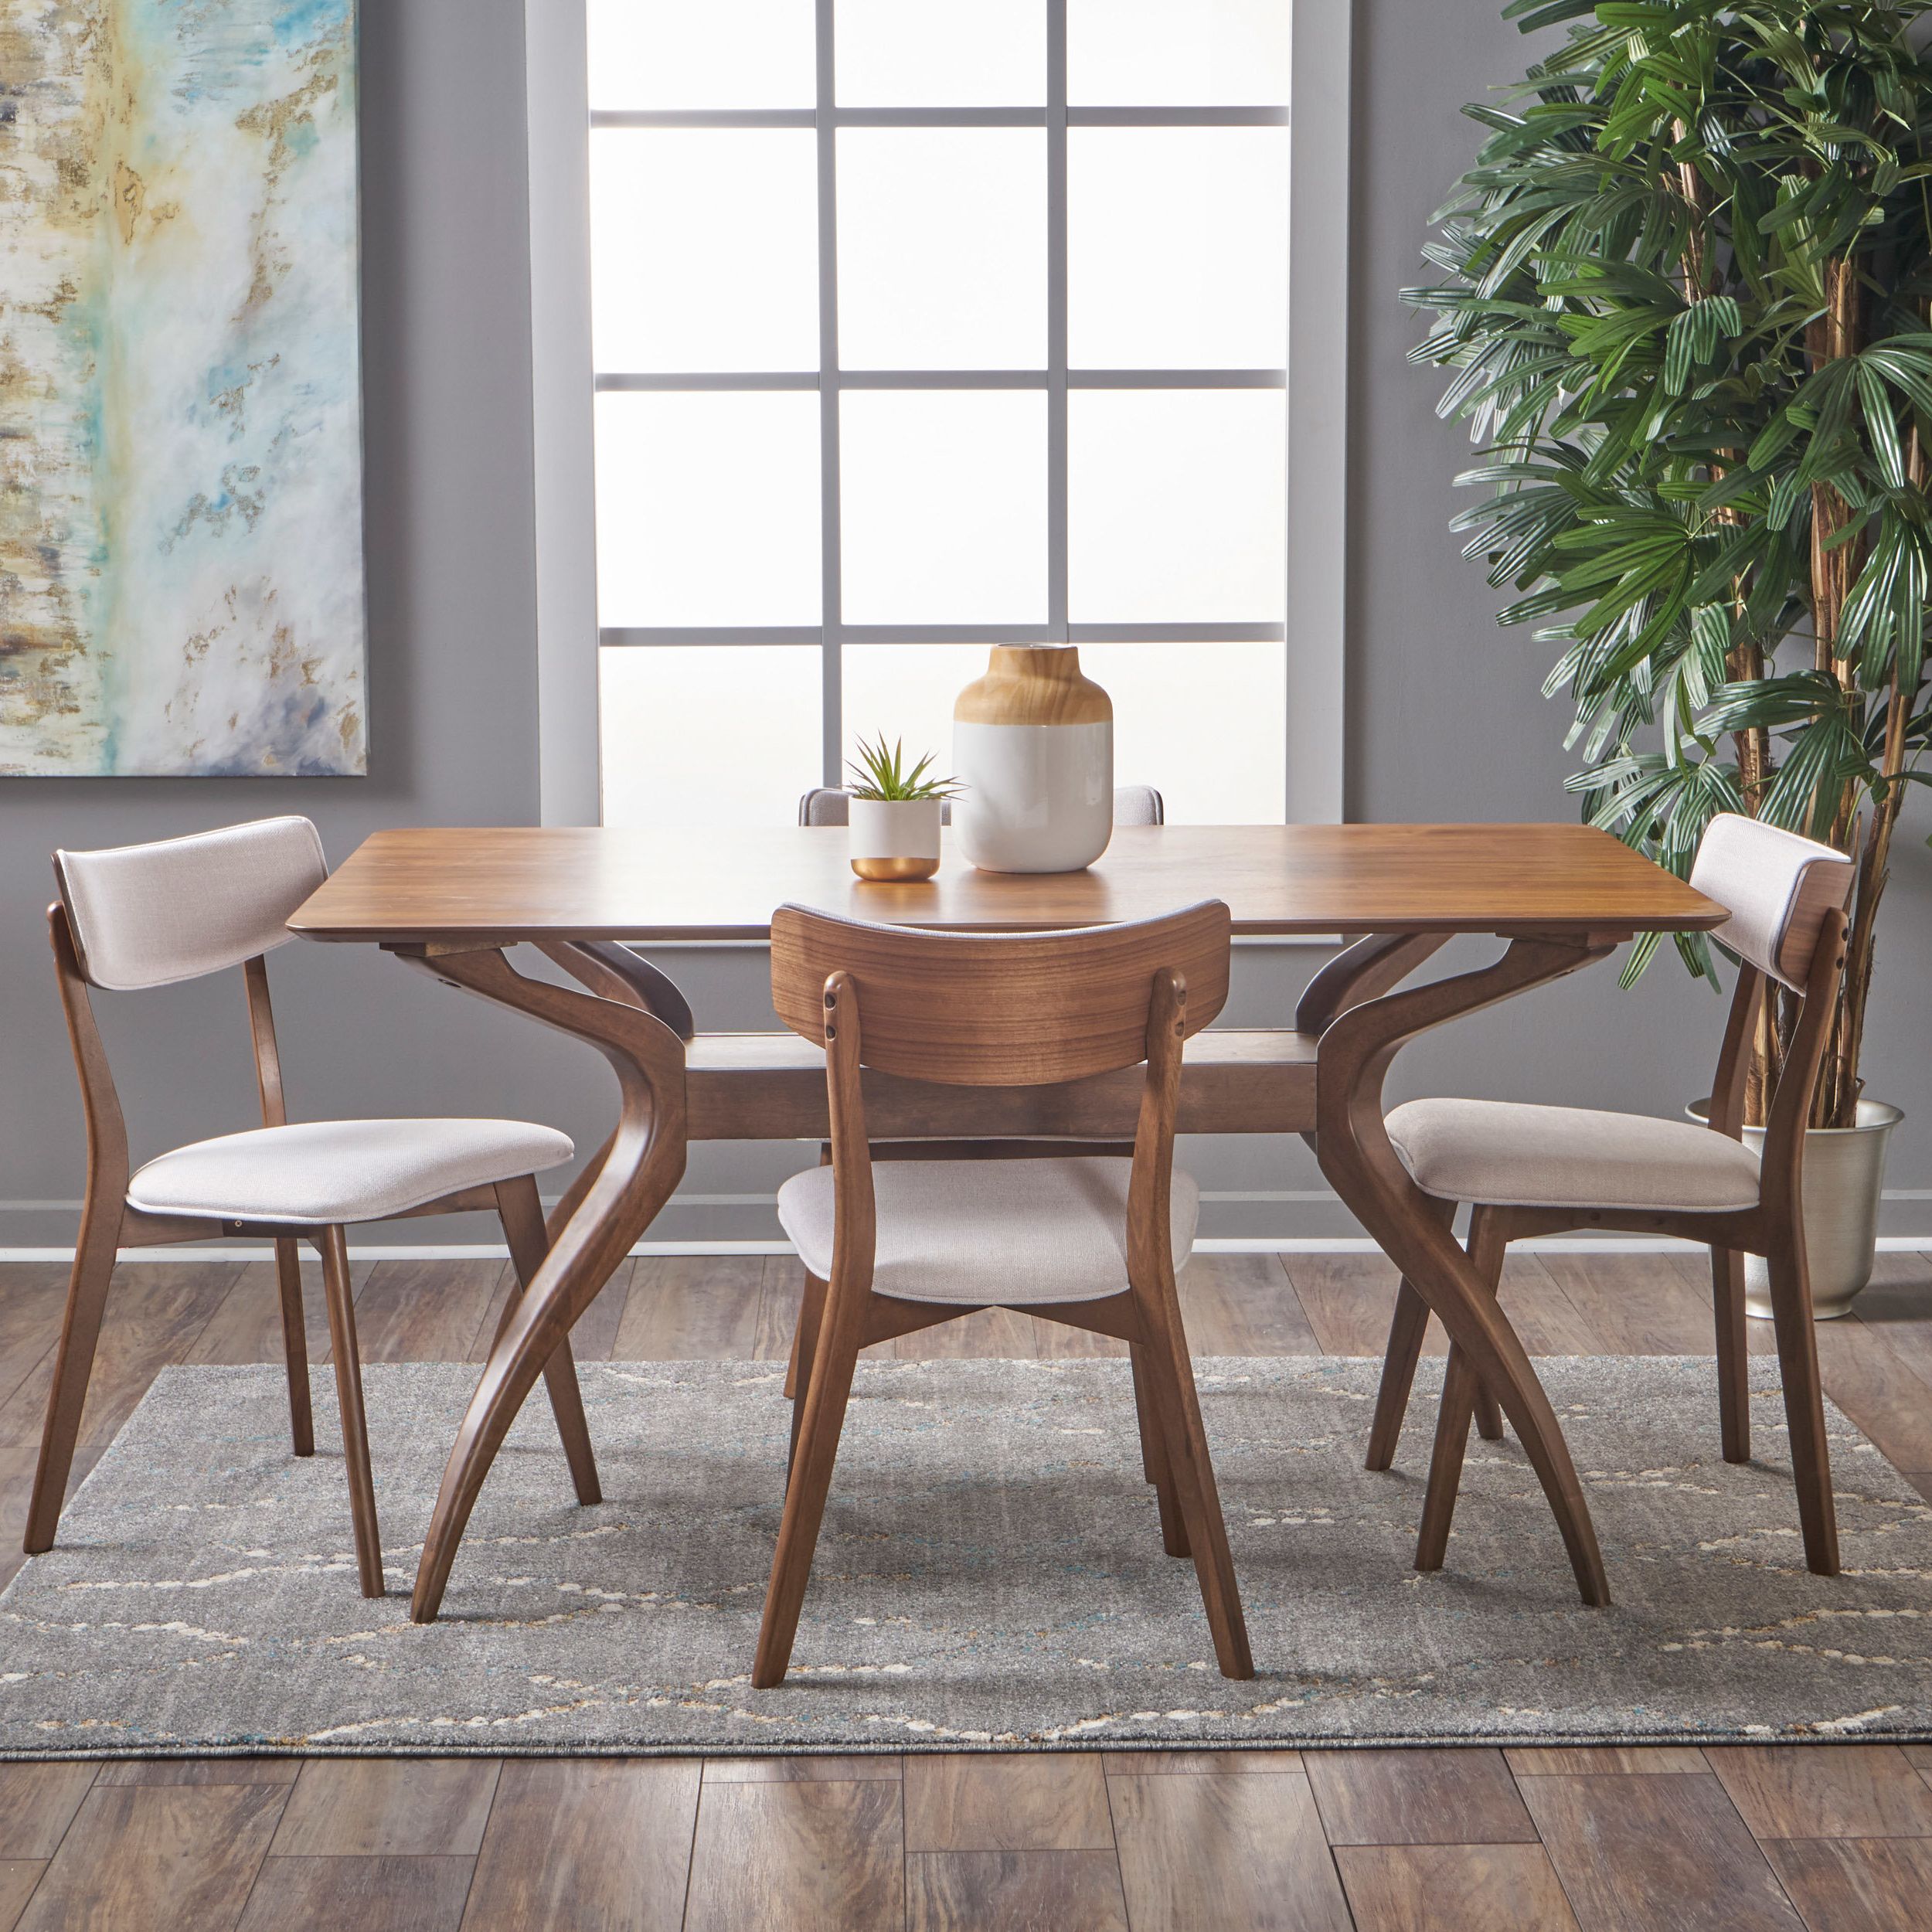 Taurean 5 Piece Dining Set Intended For Current 5 Piece Dining Sets (Photo 1 of 20)